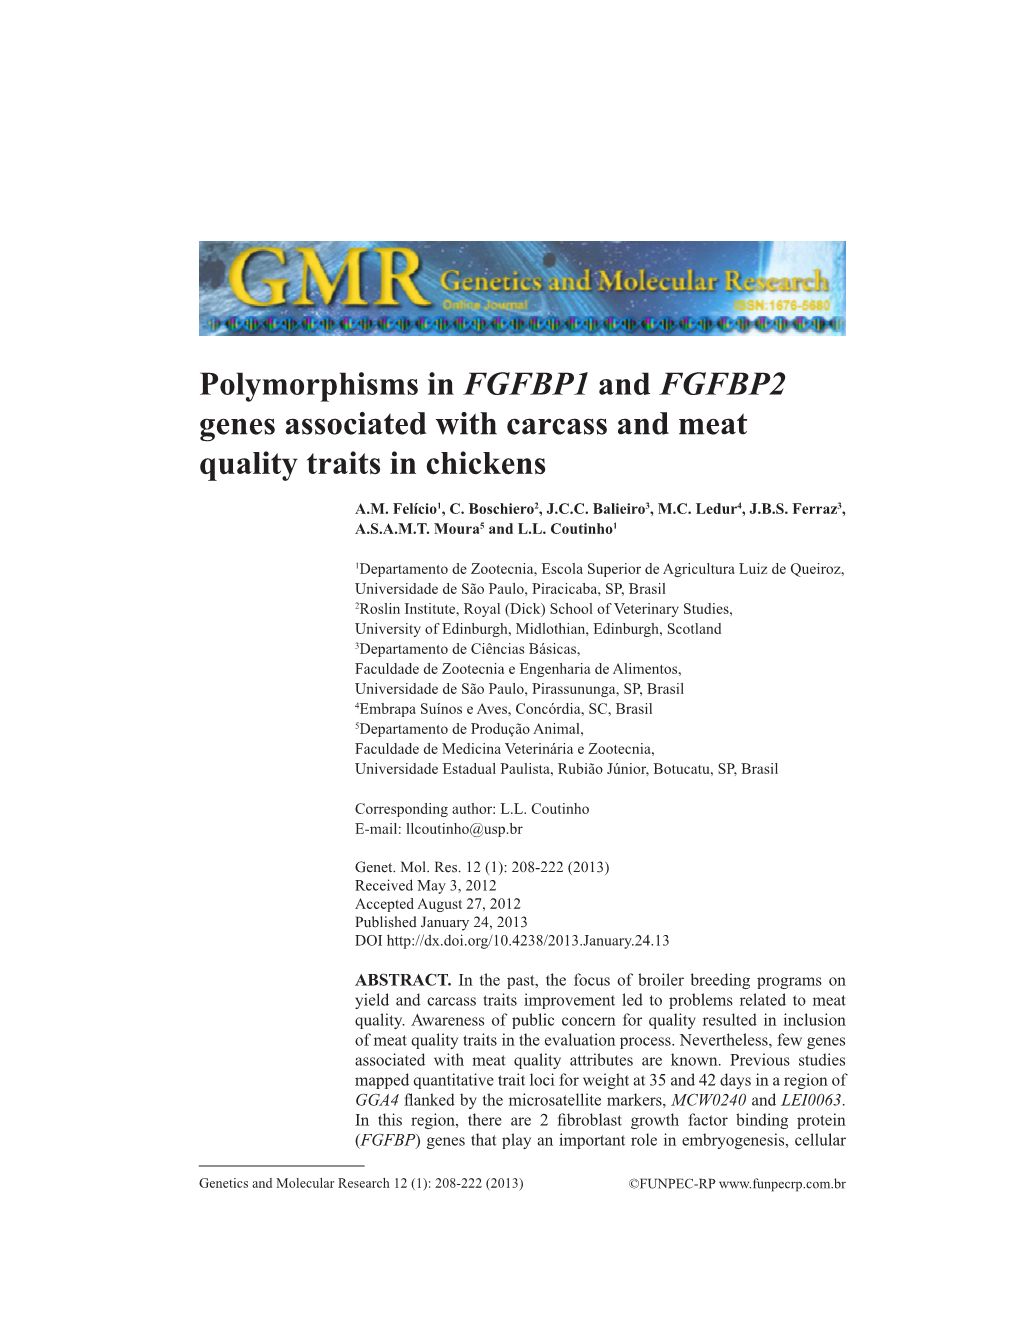 Polymorphisms in FGFBP1 and FGFBP2 Genes Associated with Carcass and Meat Quality Traits in Chickens